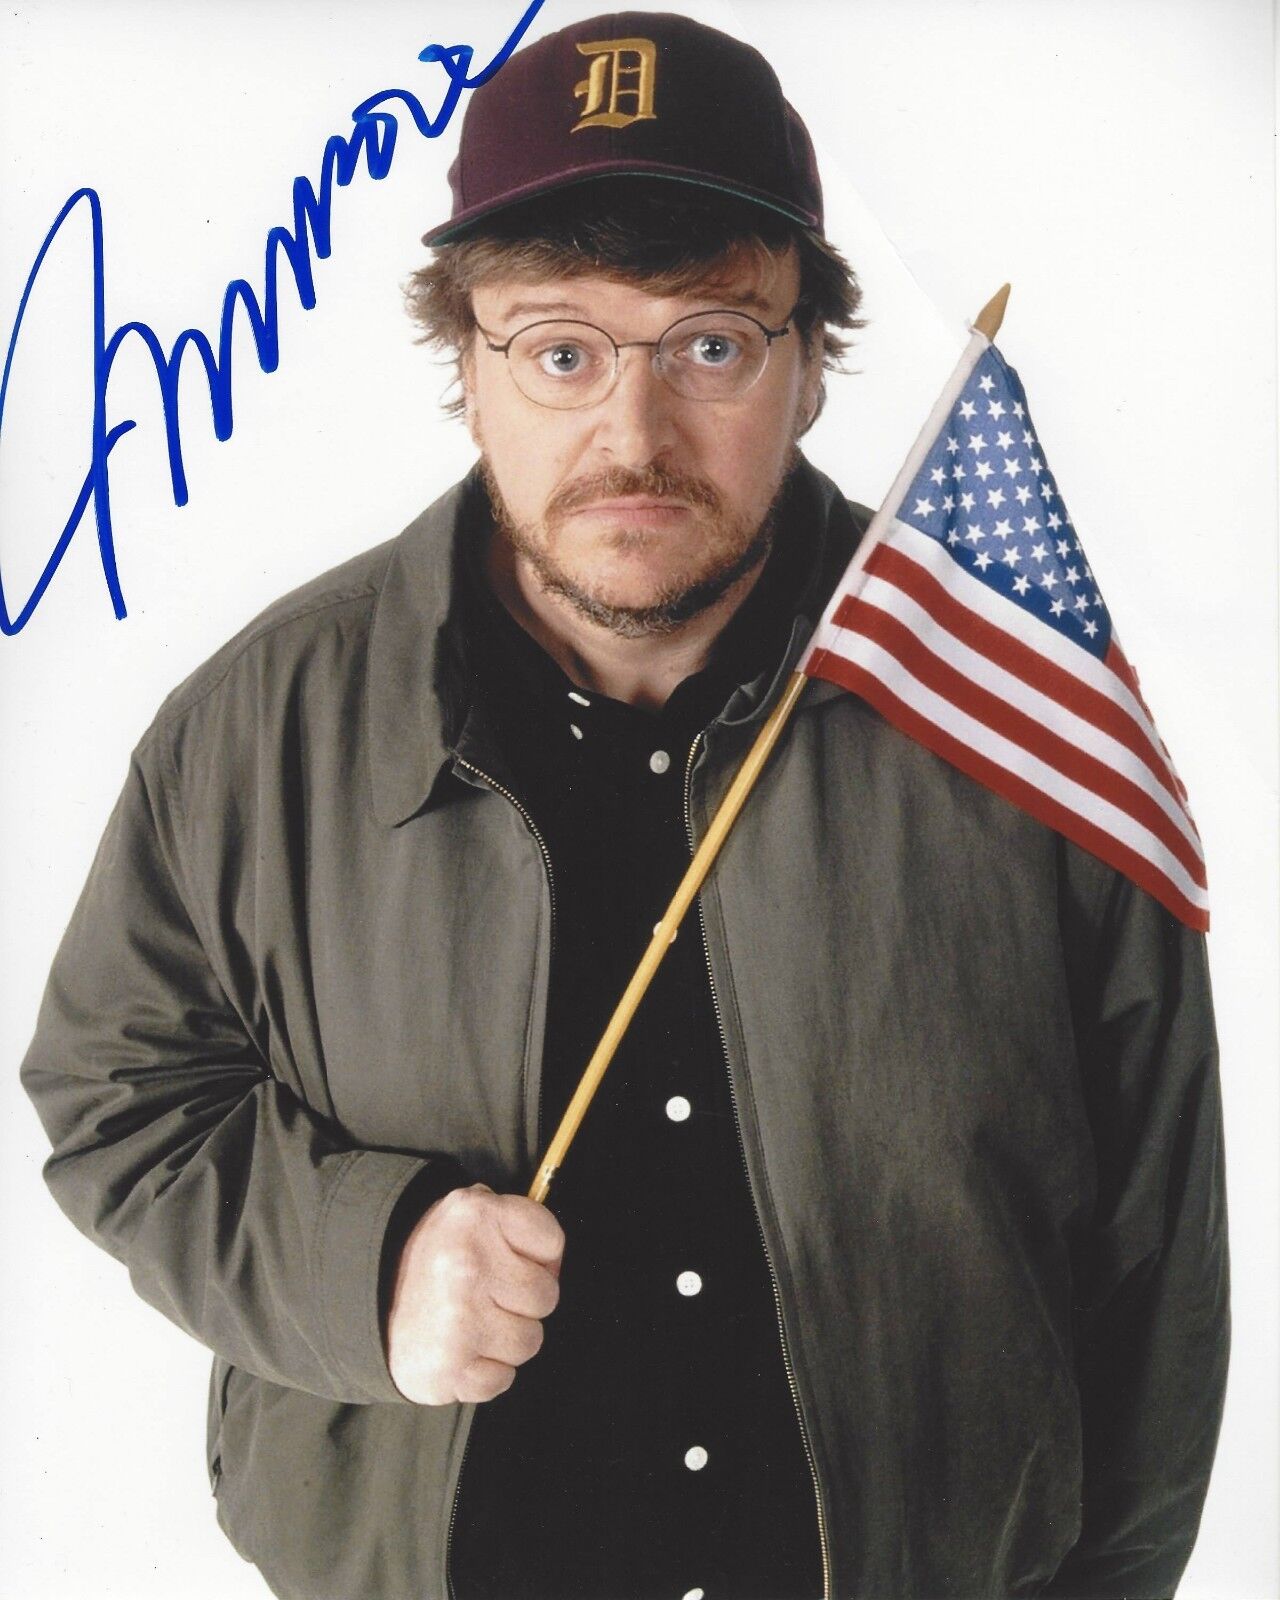 DIRECTOR MICHAEL MOORE SIGNED 8X10 Photo Poster painting W/COA FARENHEIT 9/11 11/9 DOCUMENTARY